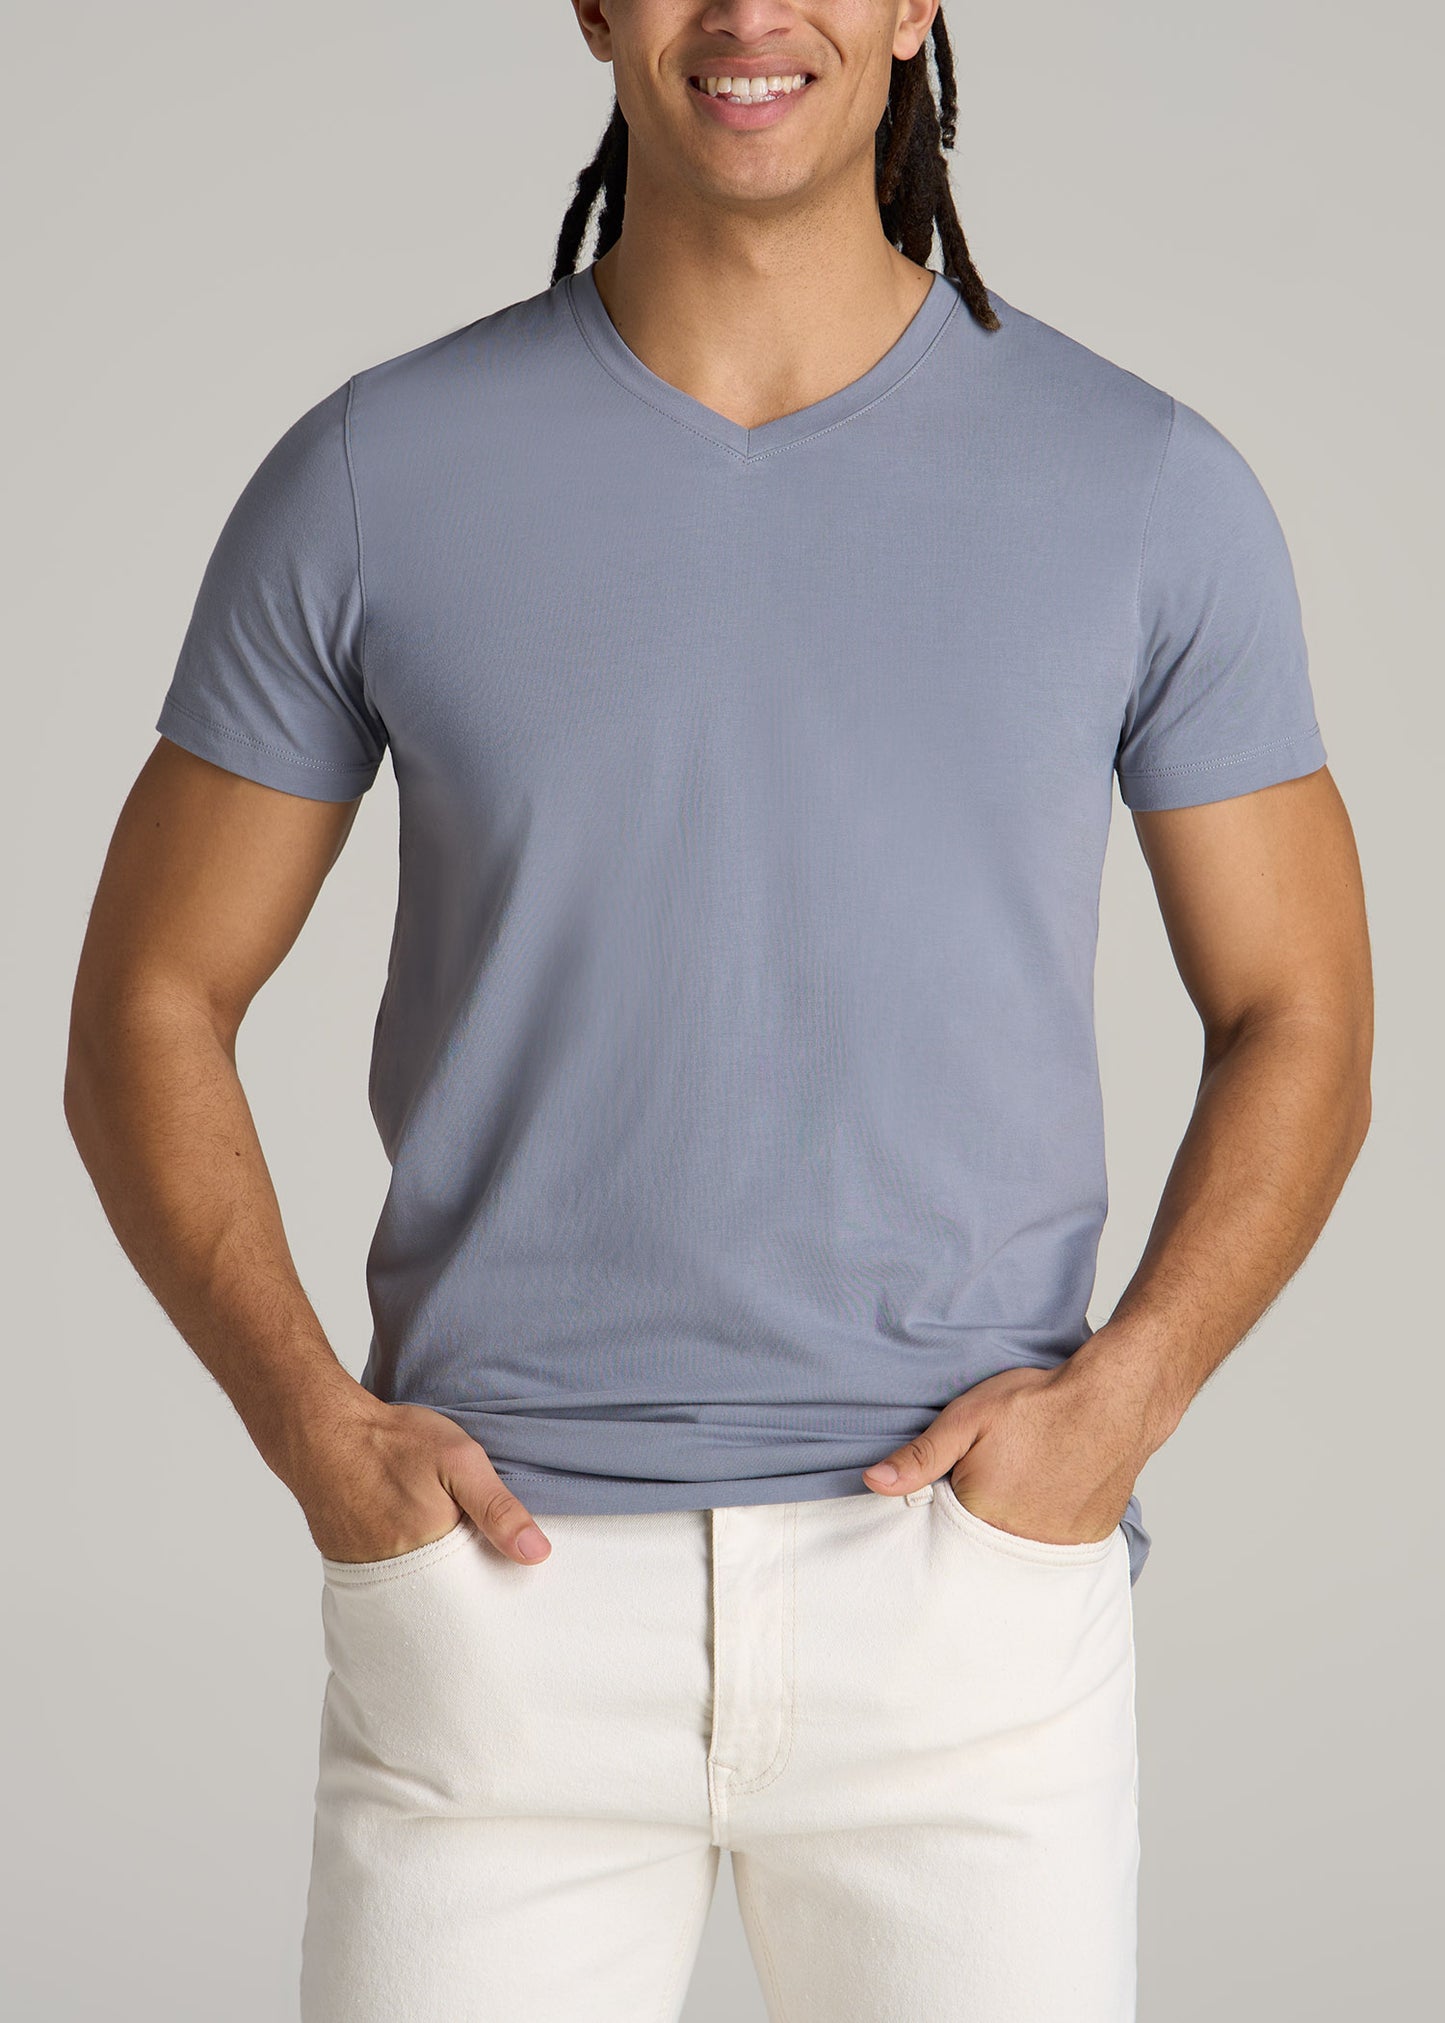 A tall man wearing American Tall's Stretch Cotton MODERN-FIT V-Neck T-Shirt for Tall Men in Skyline Grey.